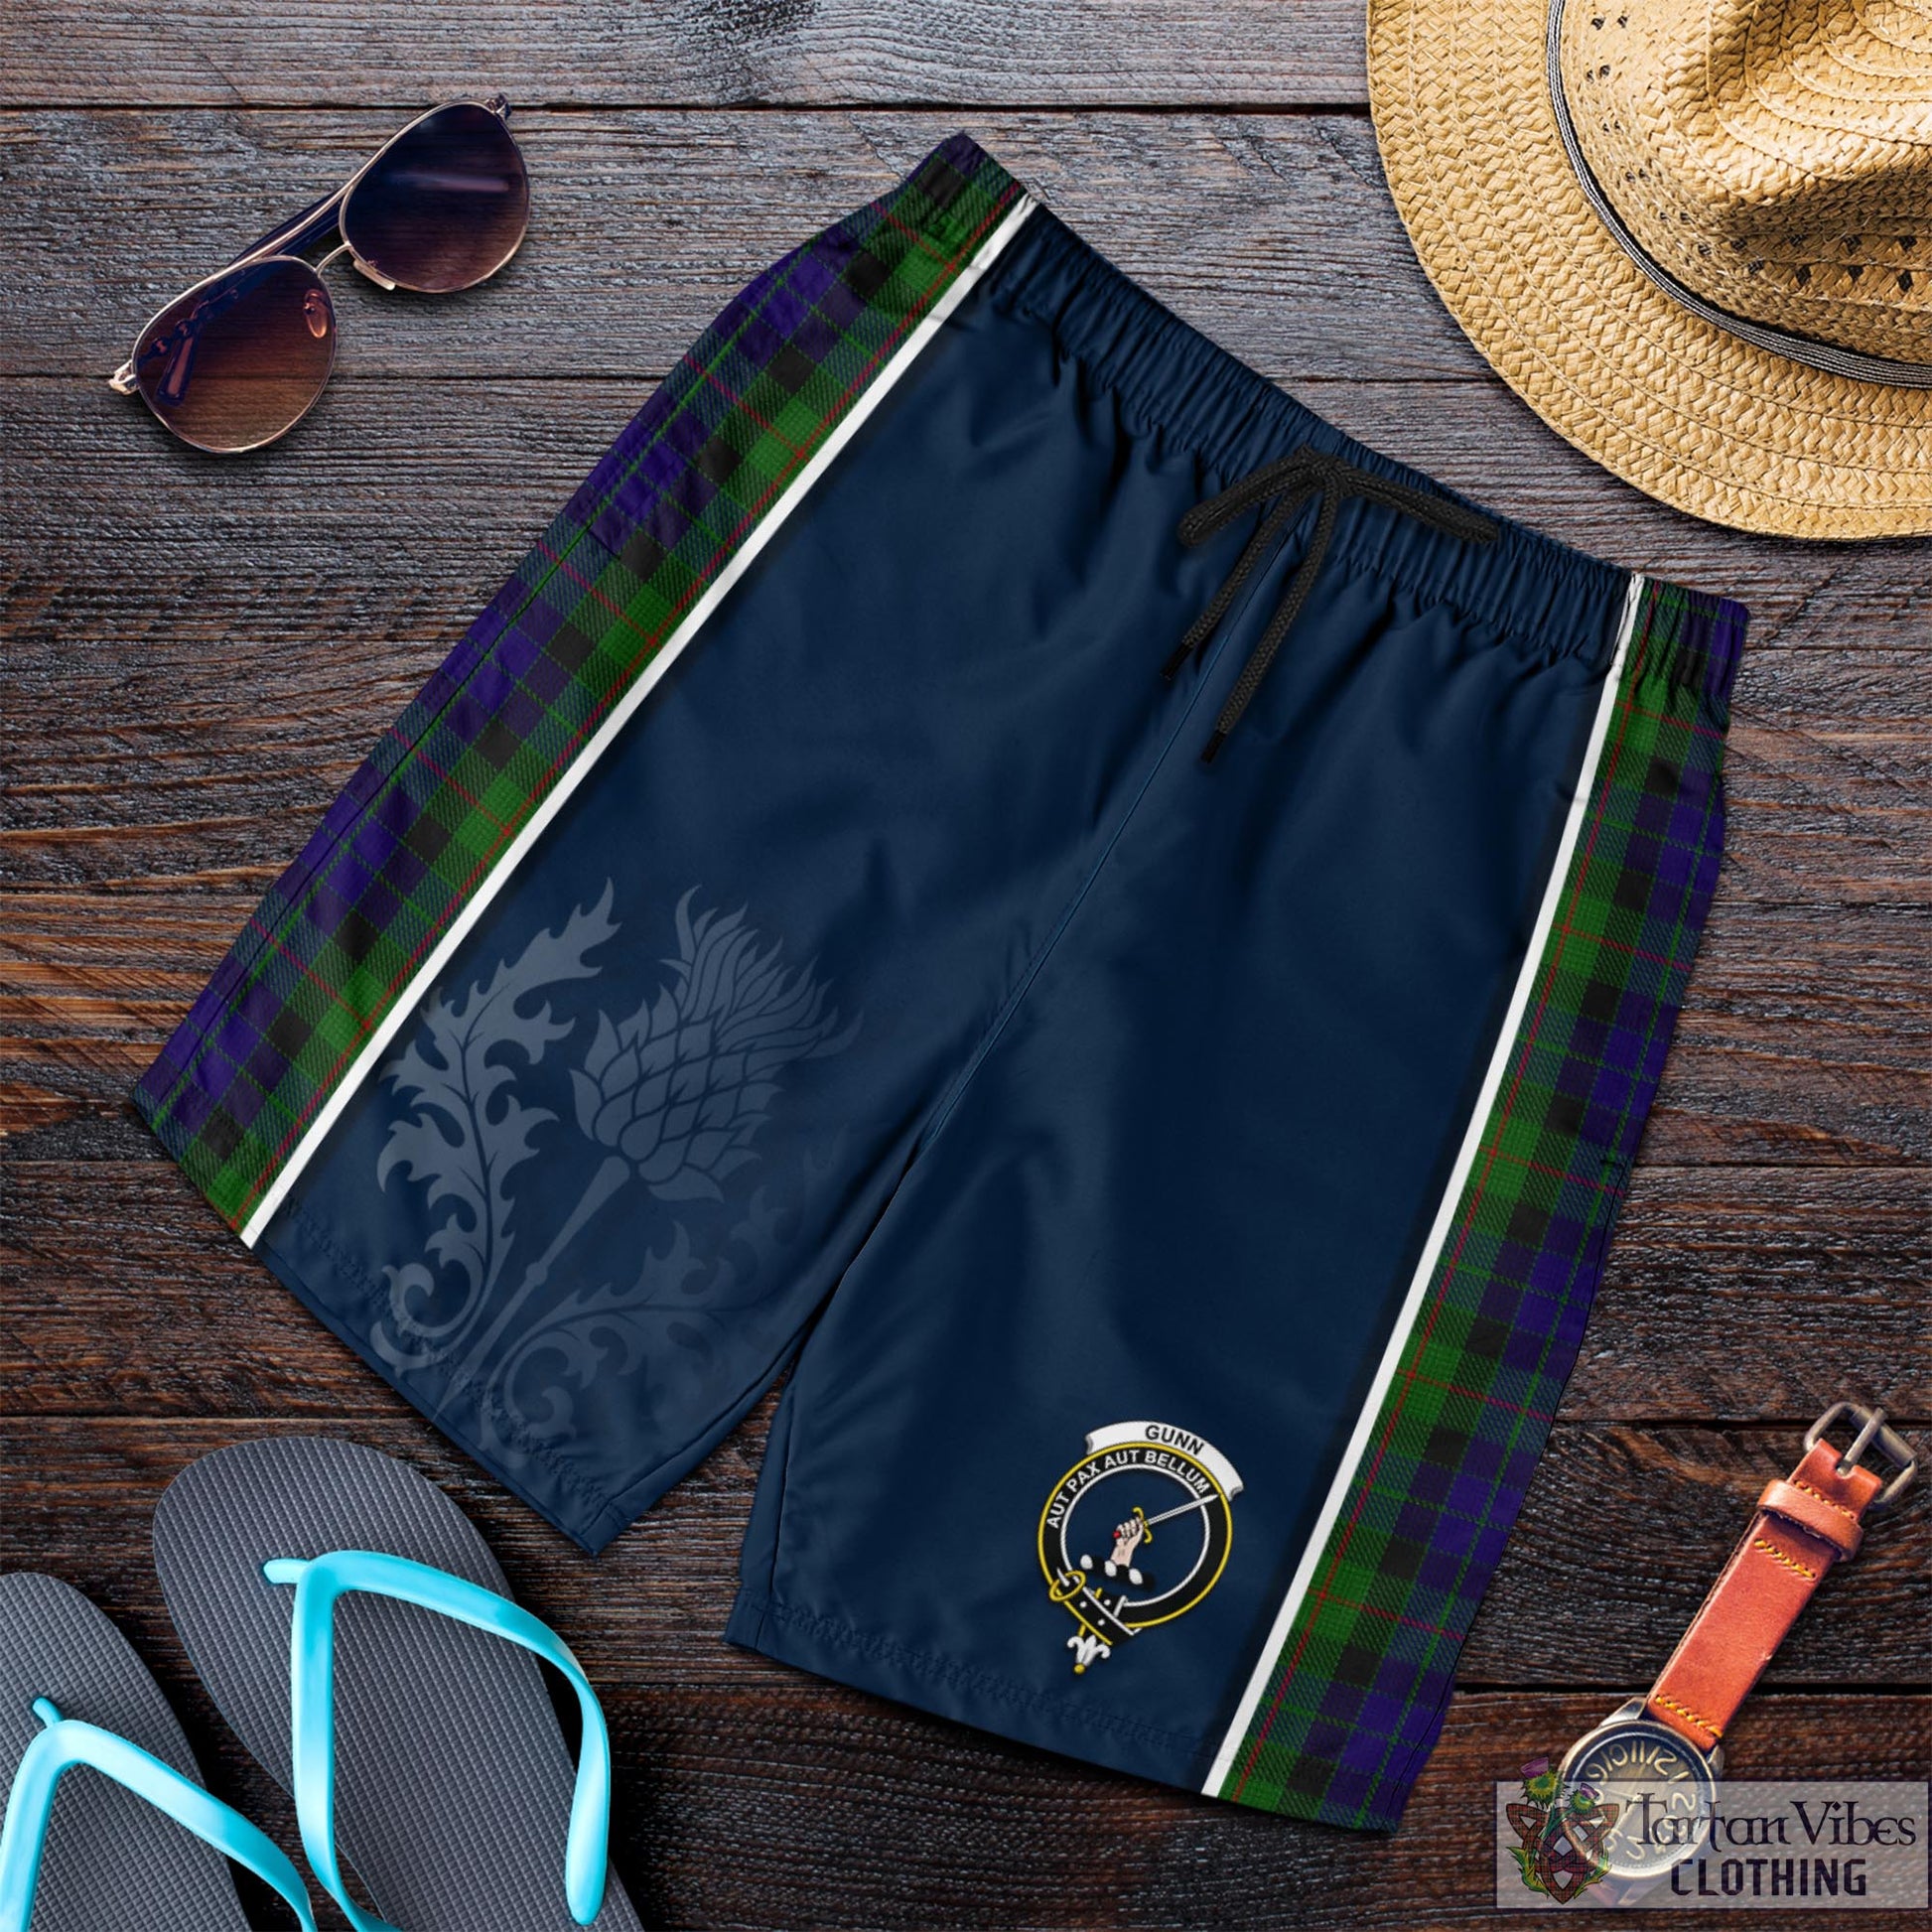 Tartan Vibes Clothing Gunn Tartan Men's Shorts with Family Crest and Scottish Thistle Vibes Sport Style